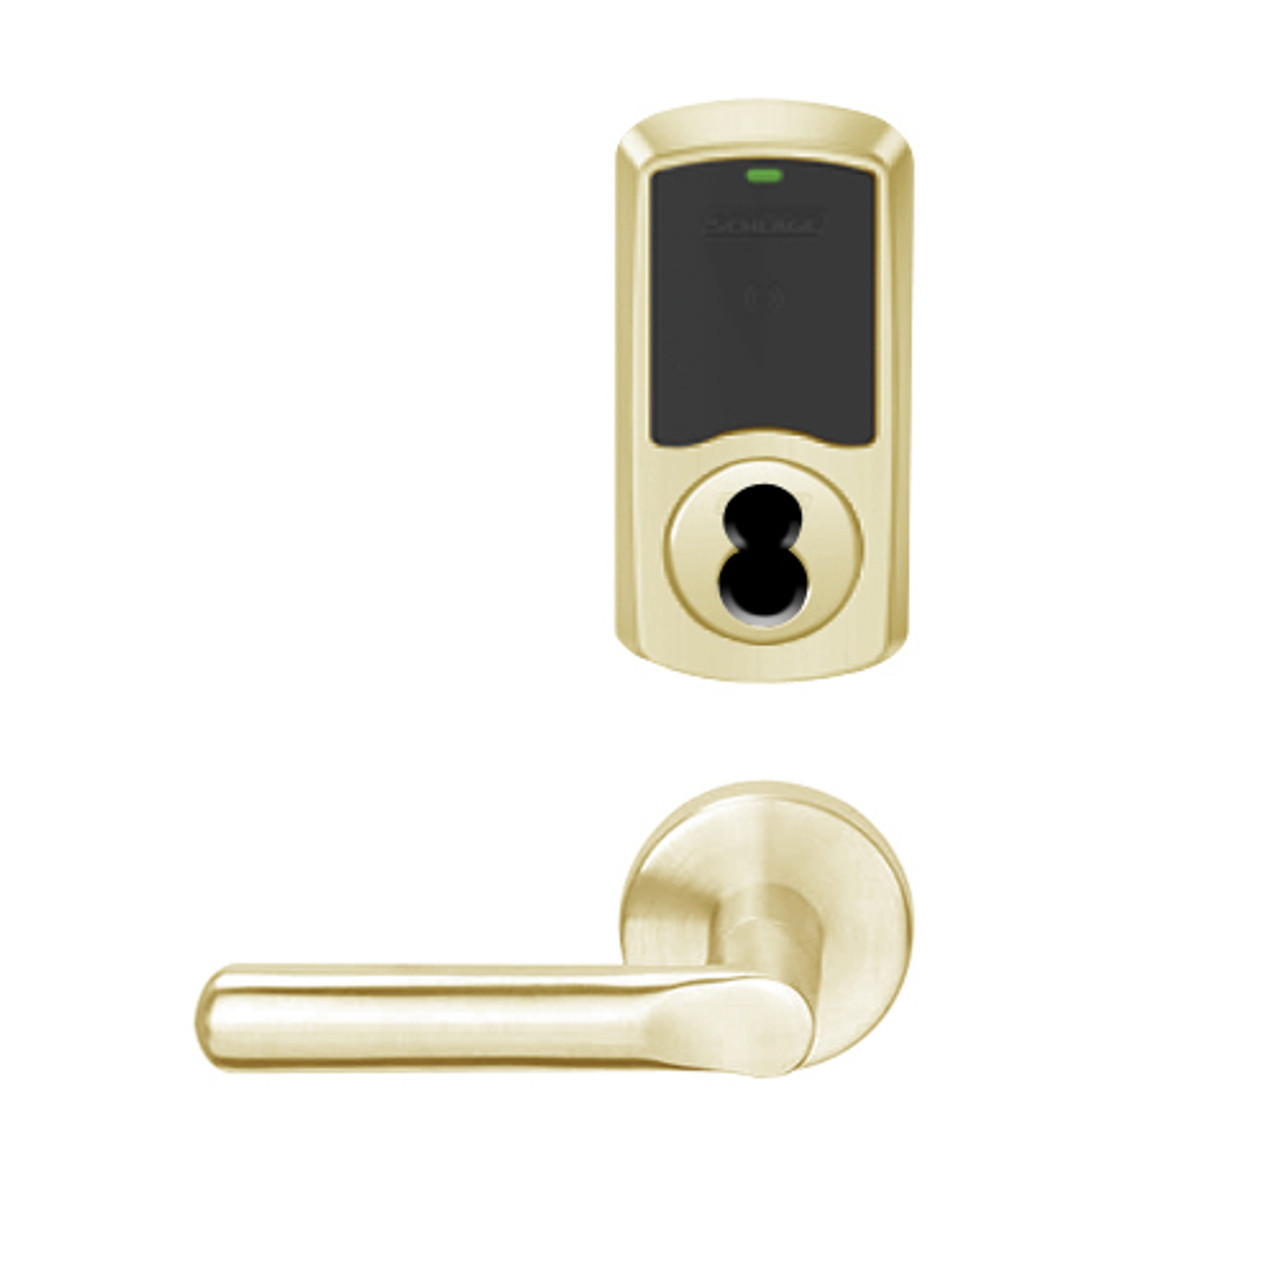 LEMB-GRW-J-18-606-00A Schlage Privacy/Office Wireless Greenwich Mortise Lock with LED Indicator and 18 Lever Prepped for FSIC in Satin Brass